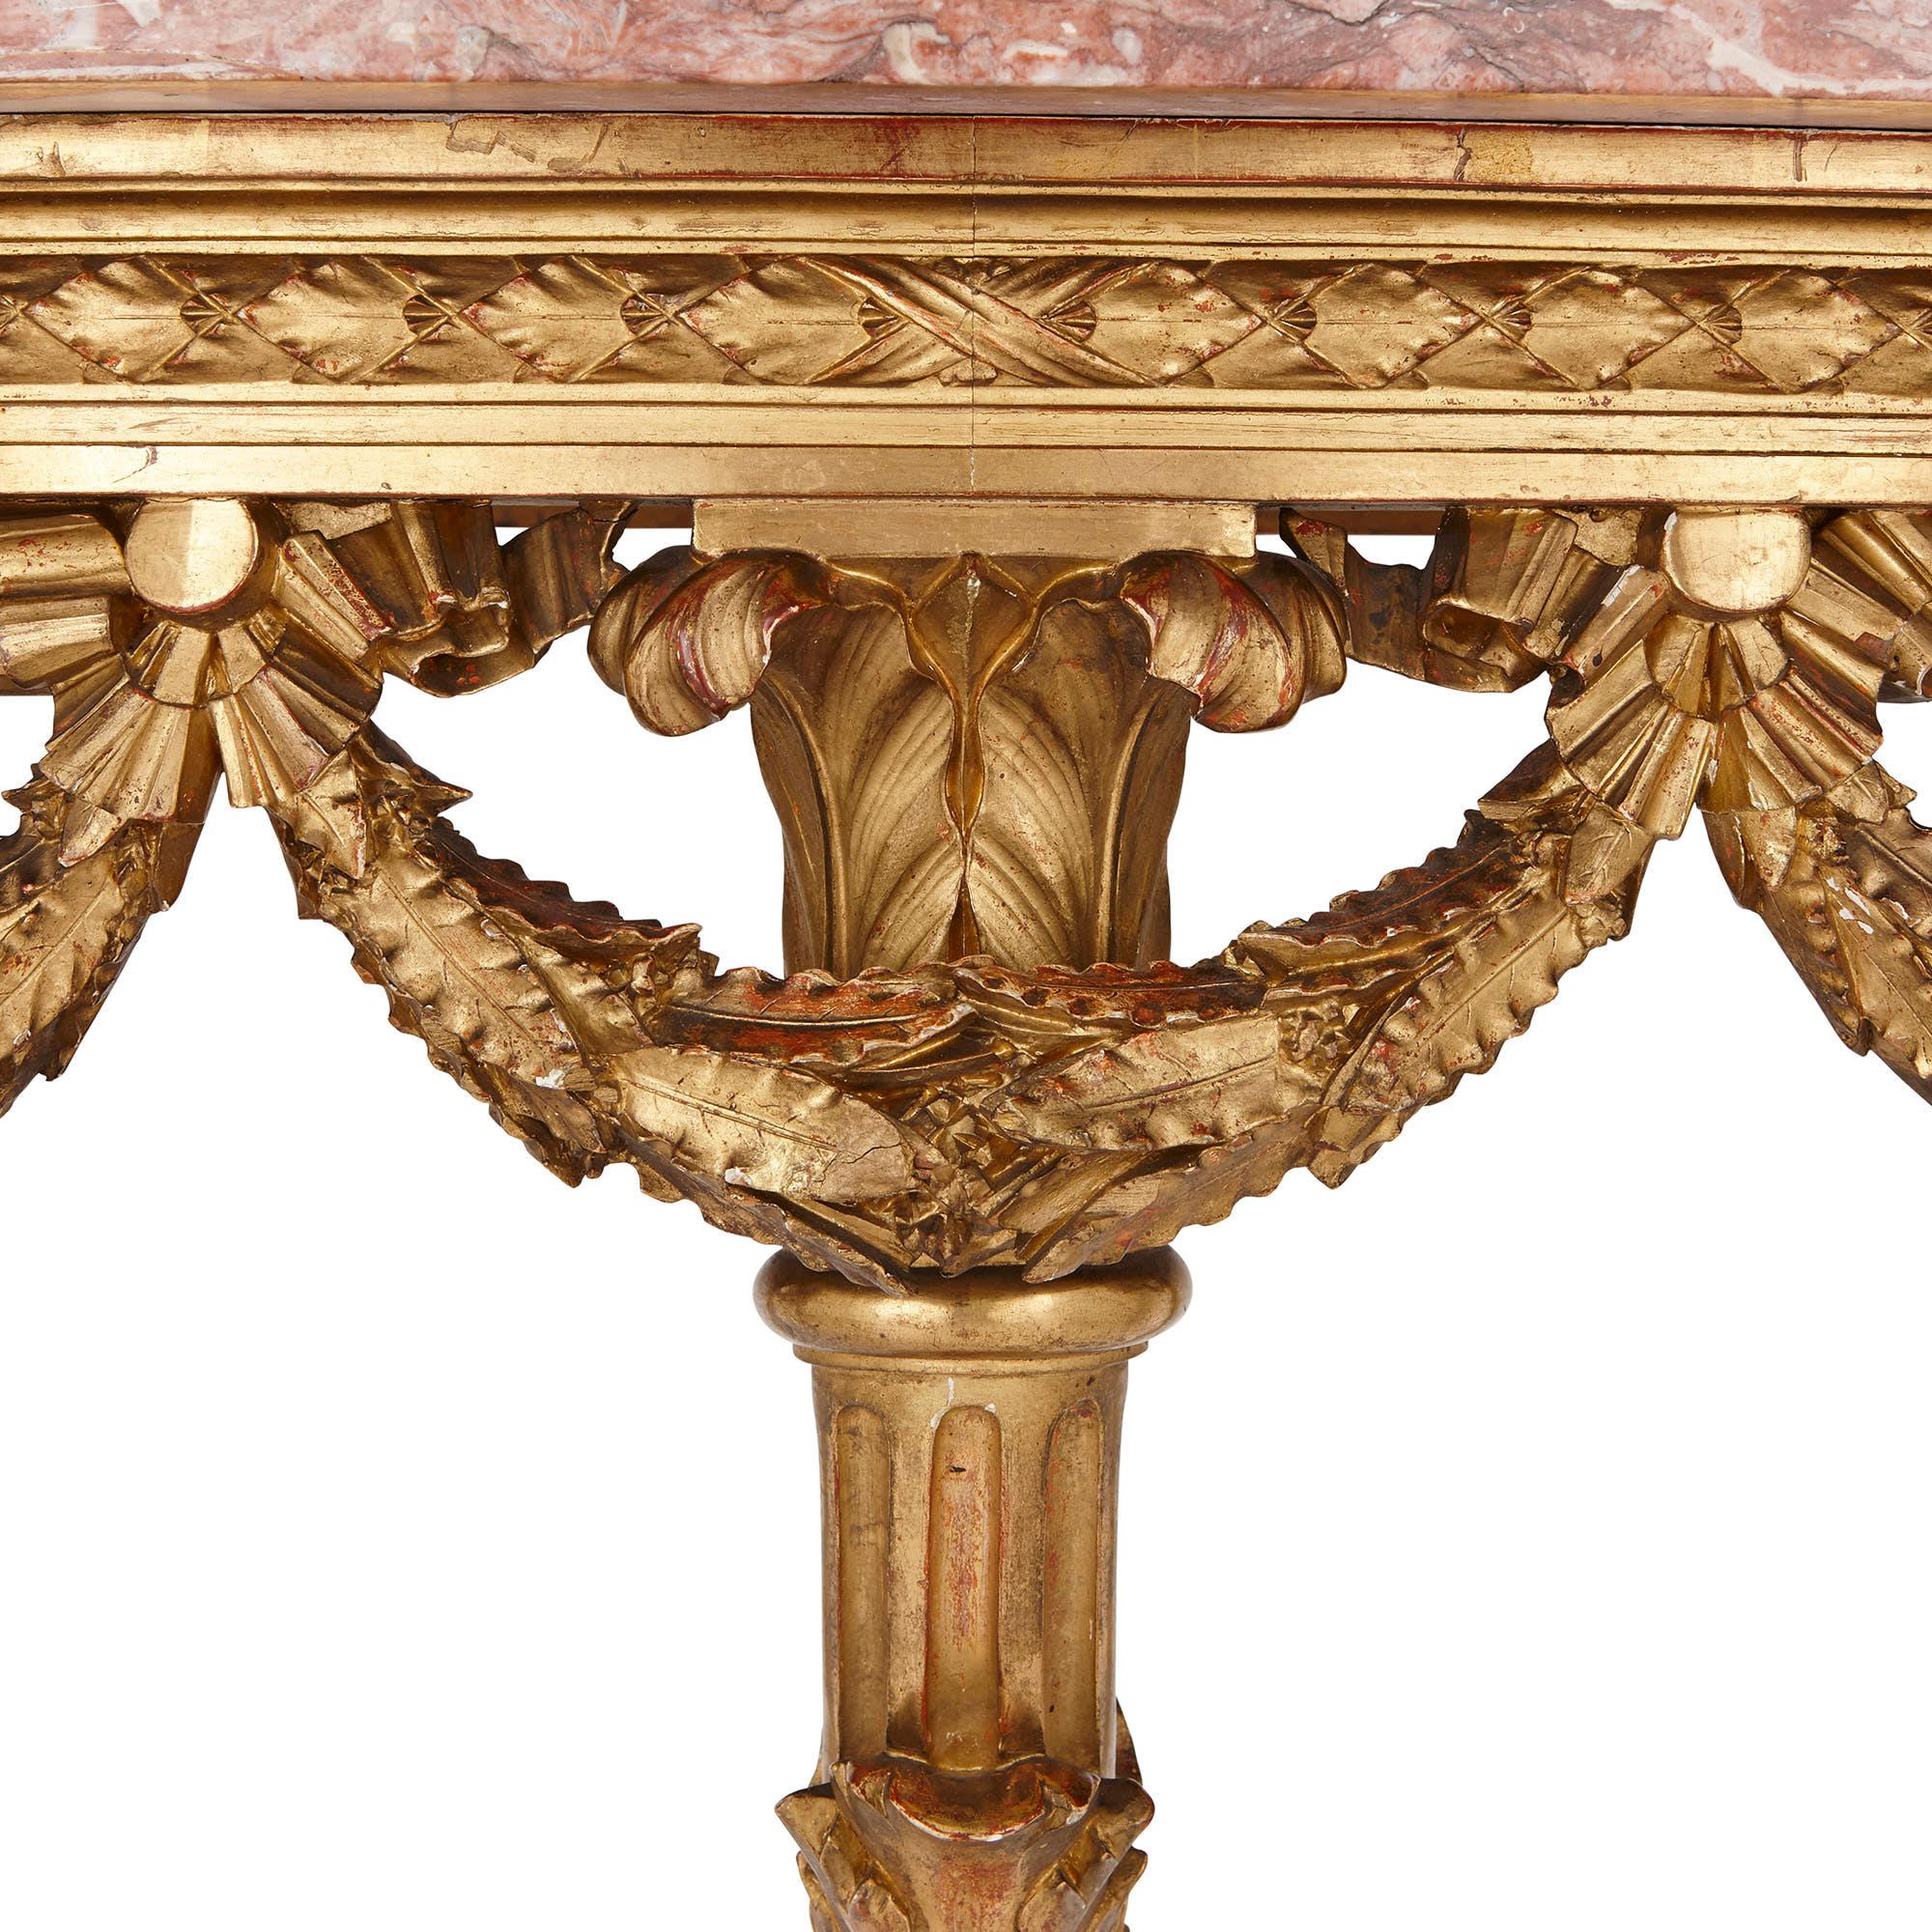 Arguably the greatest craftsman of the 19th and early 20th century, French cabinetmaker, François Linke, is responsible for the design of this stunning console table. In his lifetime, Linke supplied works to an elite international clientele, and won